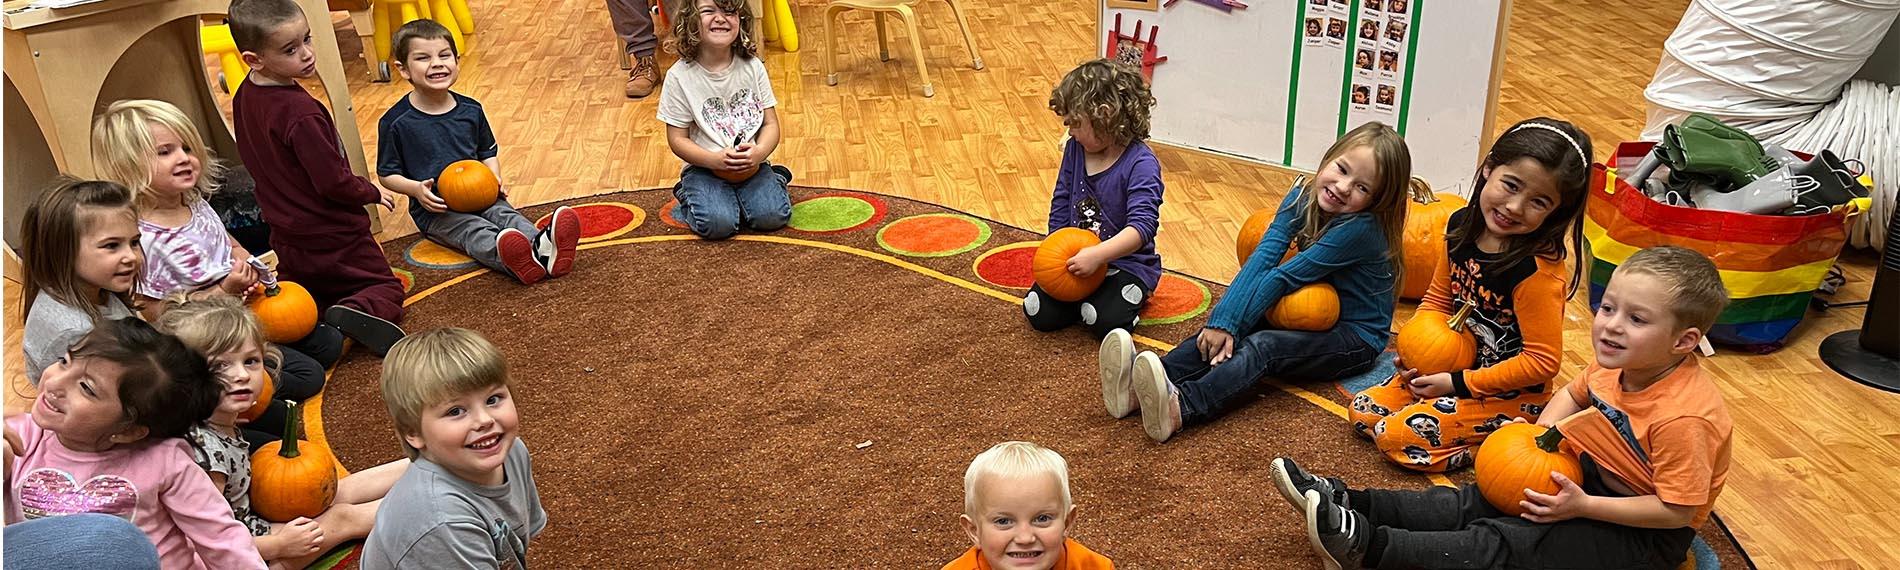 Preschool students sitting on the circle carpet with their pumpkins